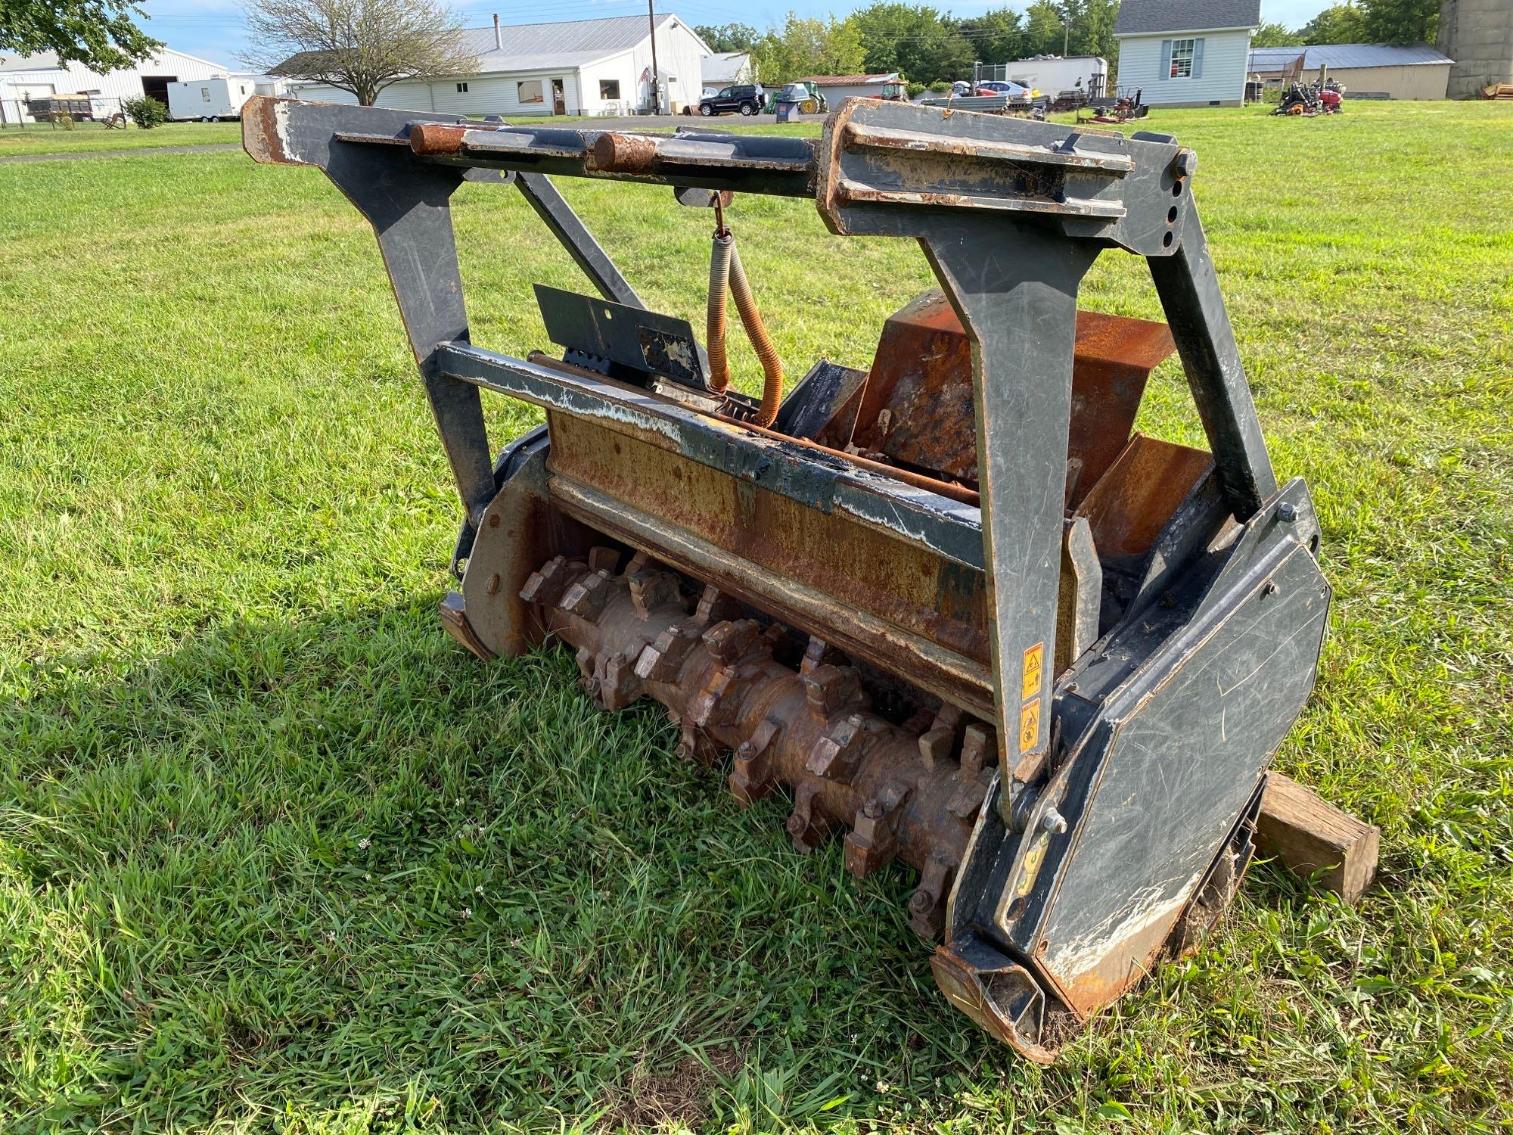 Image for Caterpillar Mulching Head, came off a machine that was in a fire, needs parts per seller